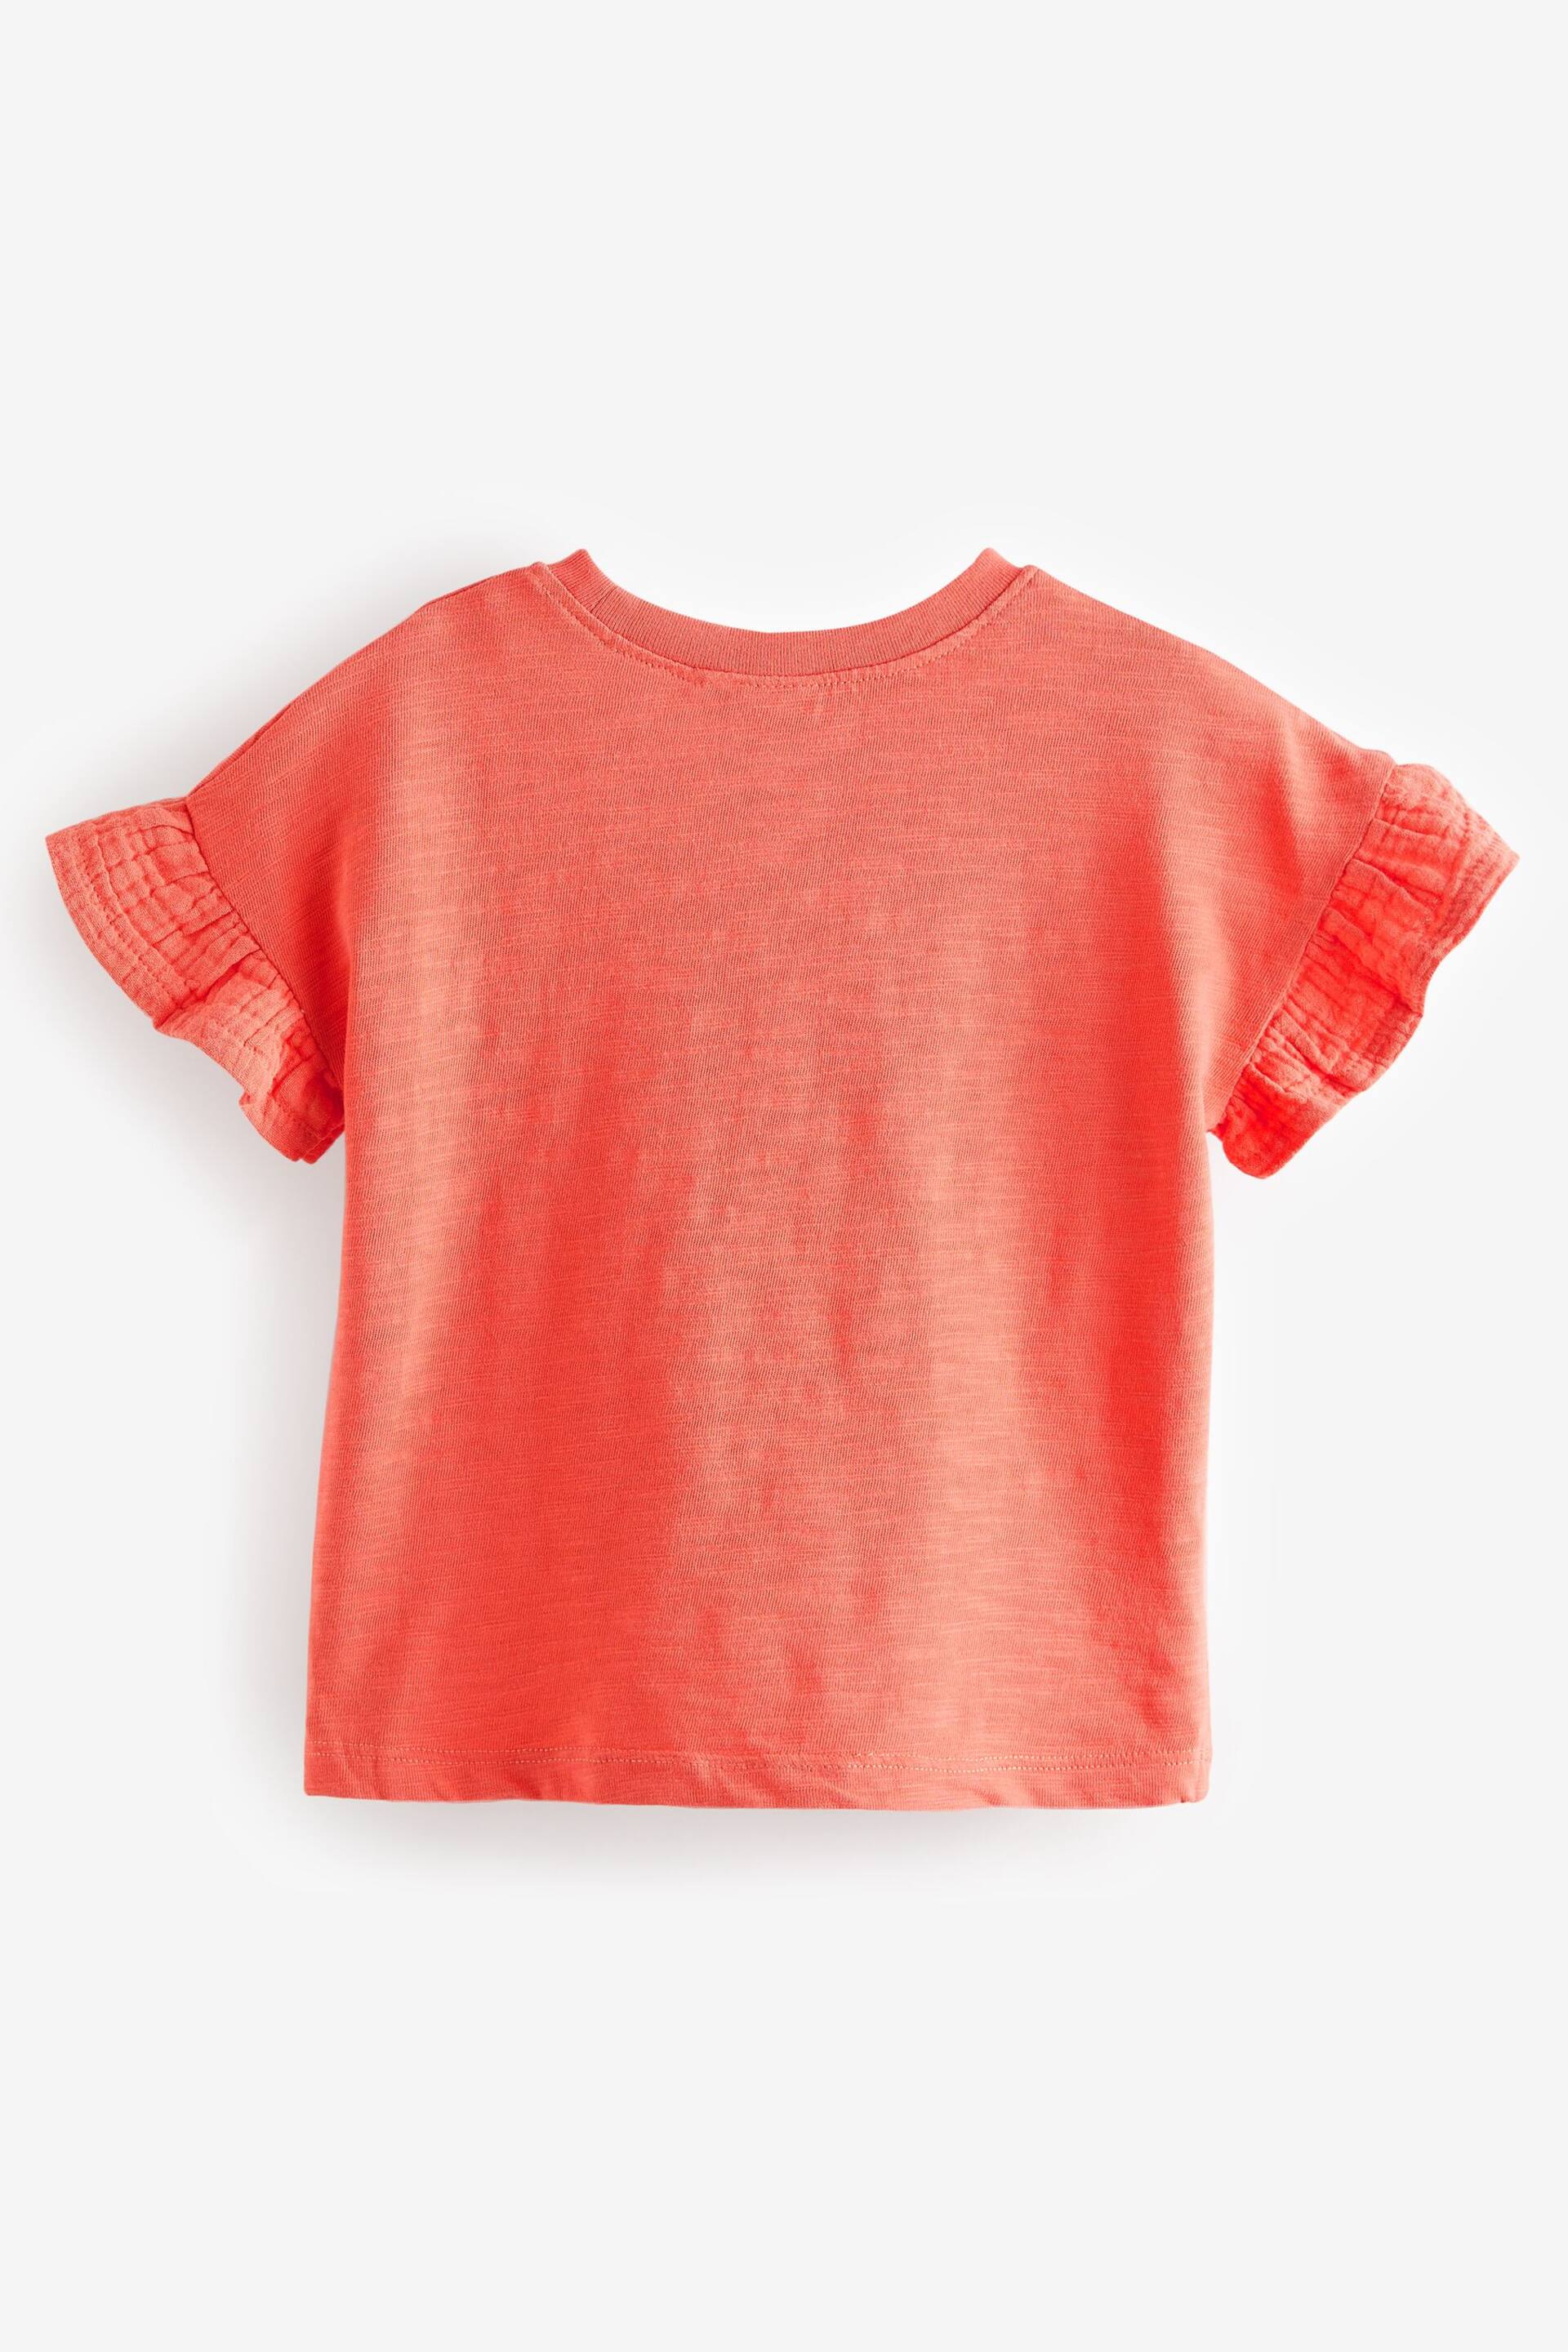 Coral Pink Crochet Butterfly T-Shirt (3mths-7yrs) - Image 6 of 7